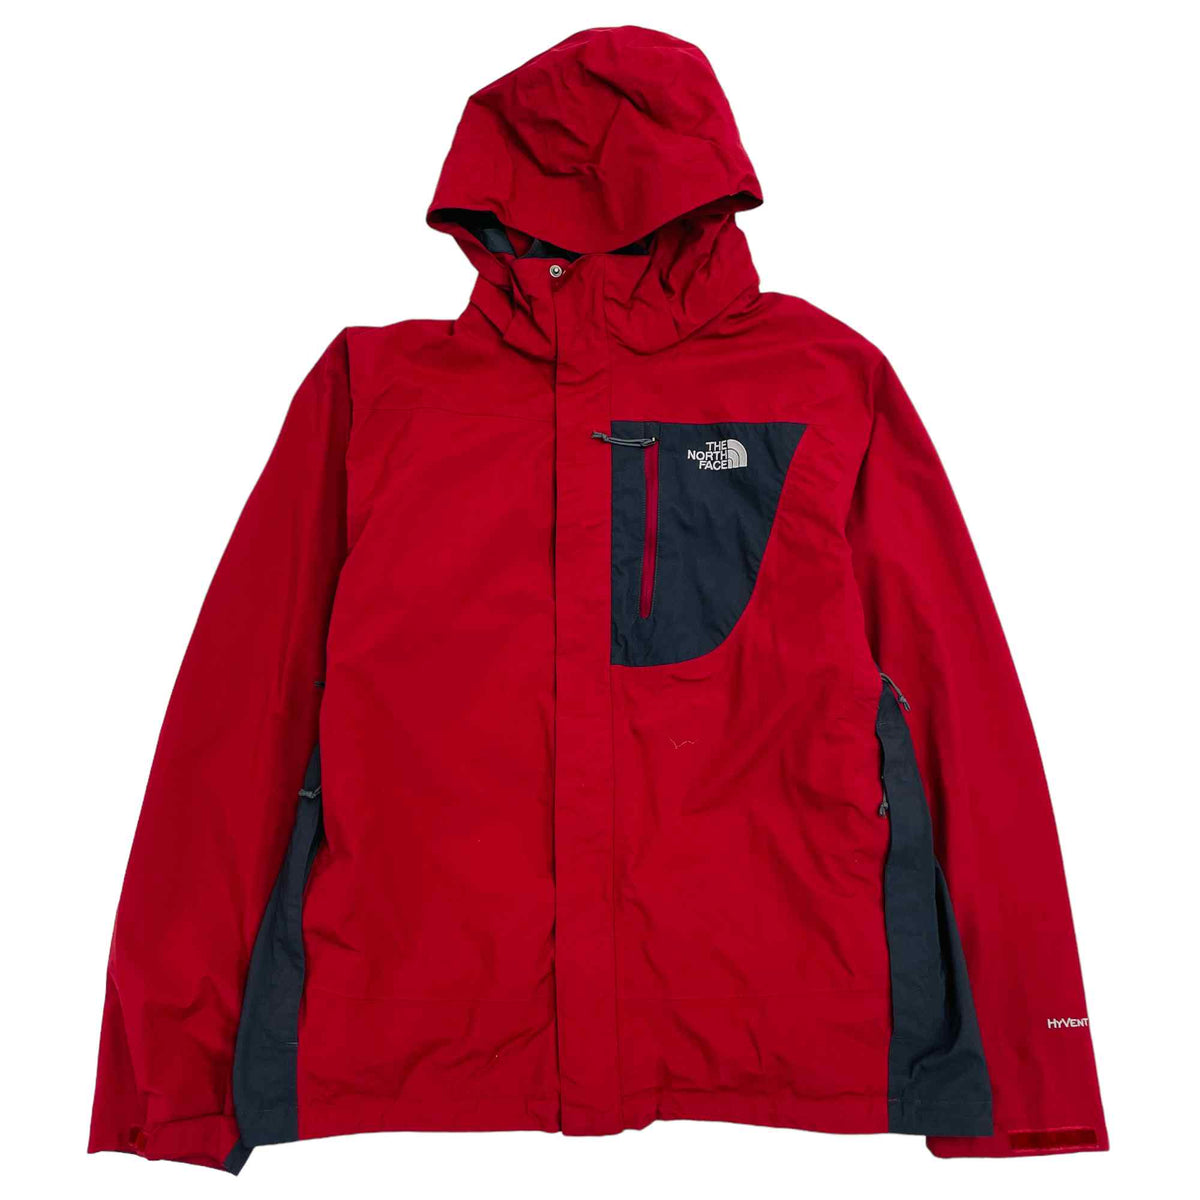 The North Face HyVent Jacket - Large – The Vintage Store